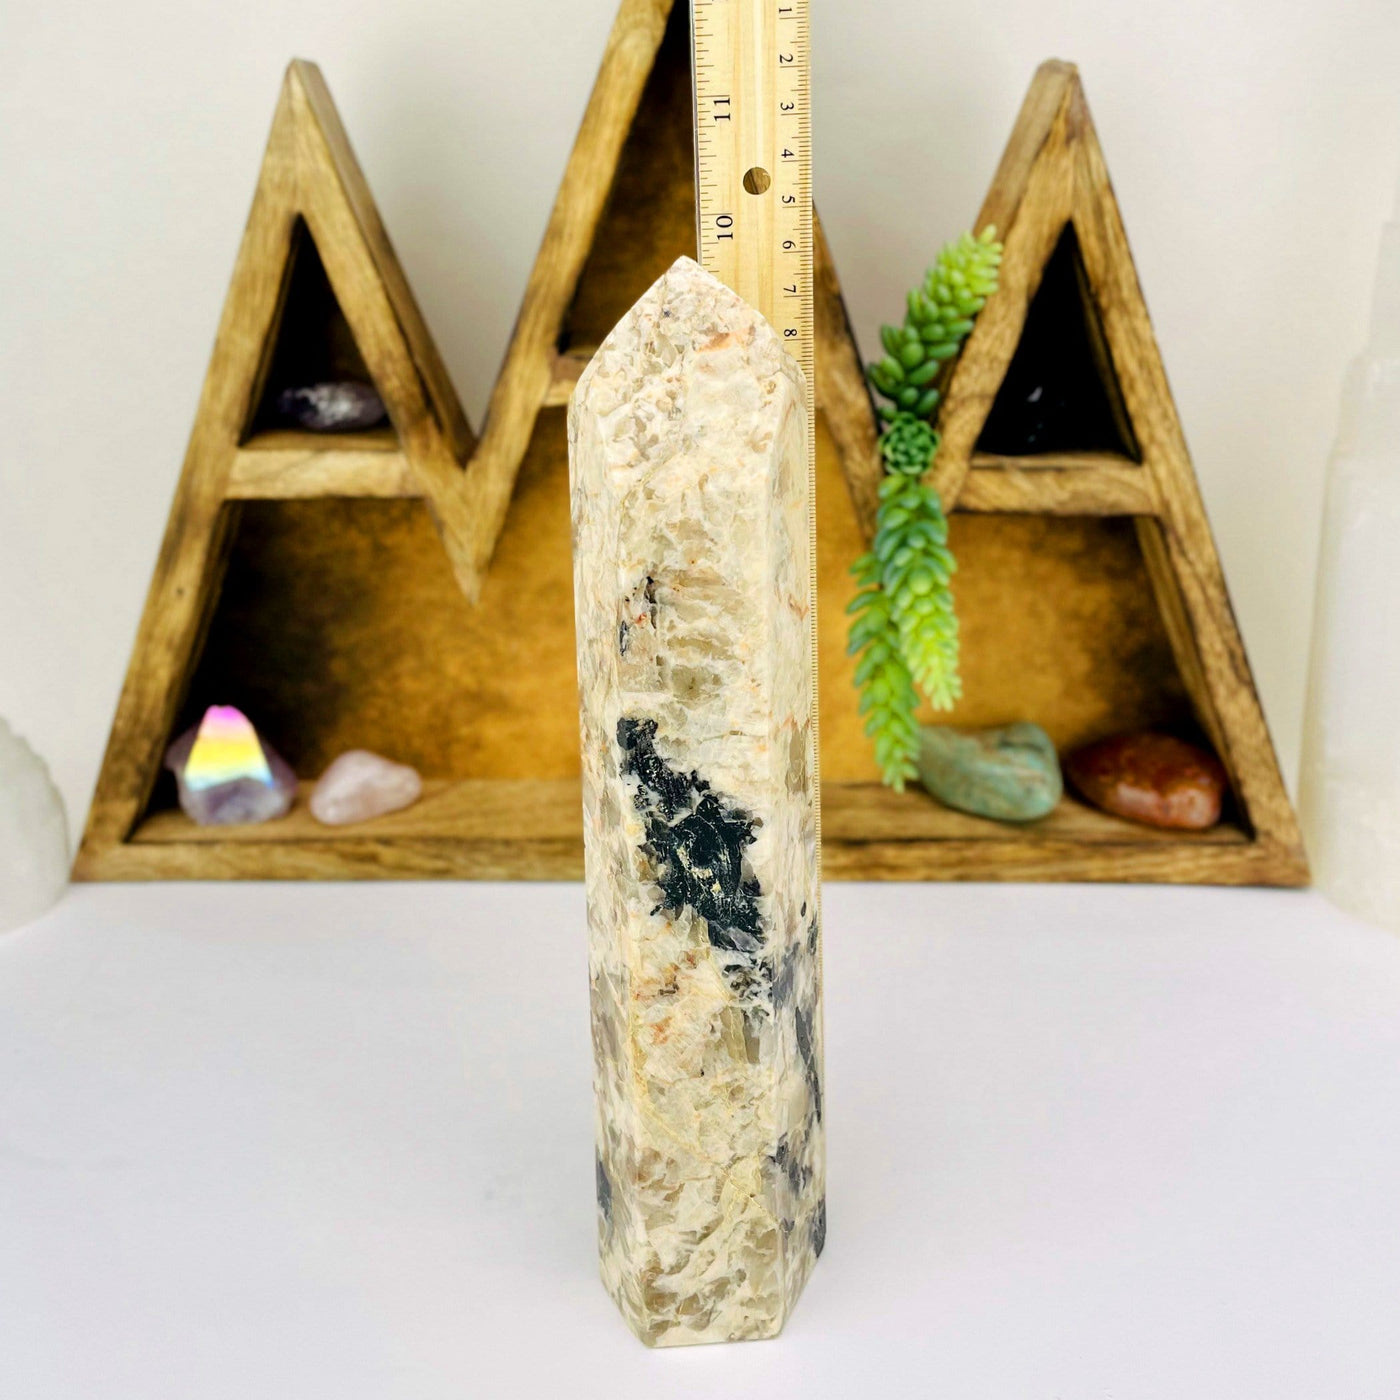 Tourmaline with Feldspar Tower next to a ruler for size reference with decorations in the background